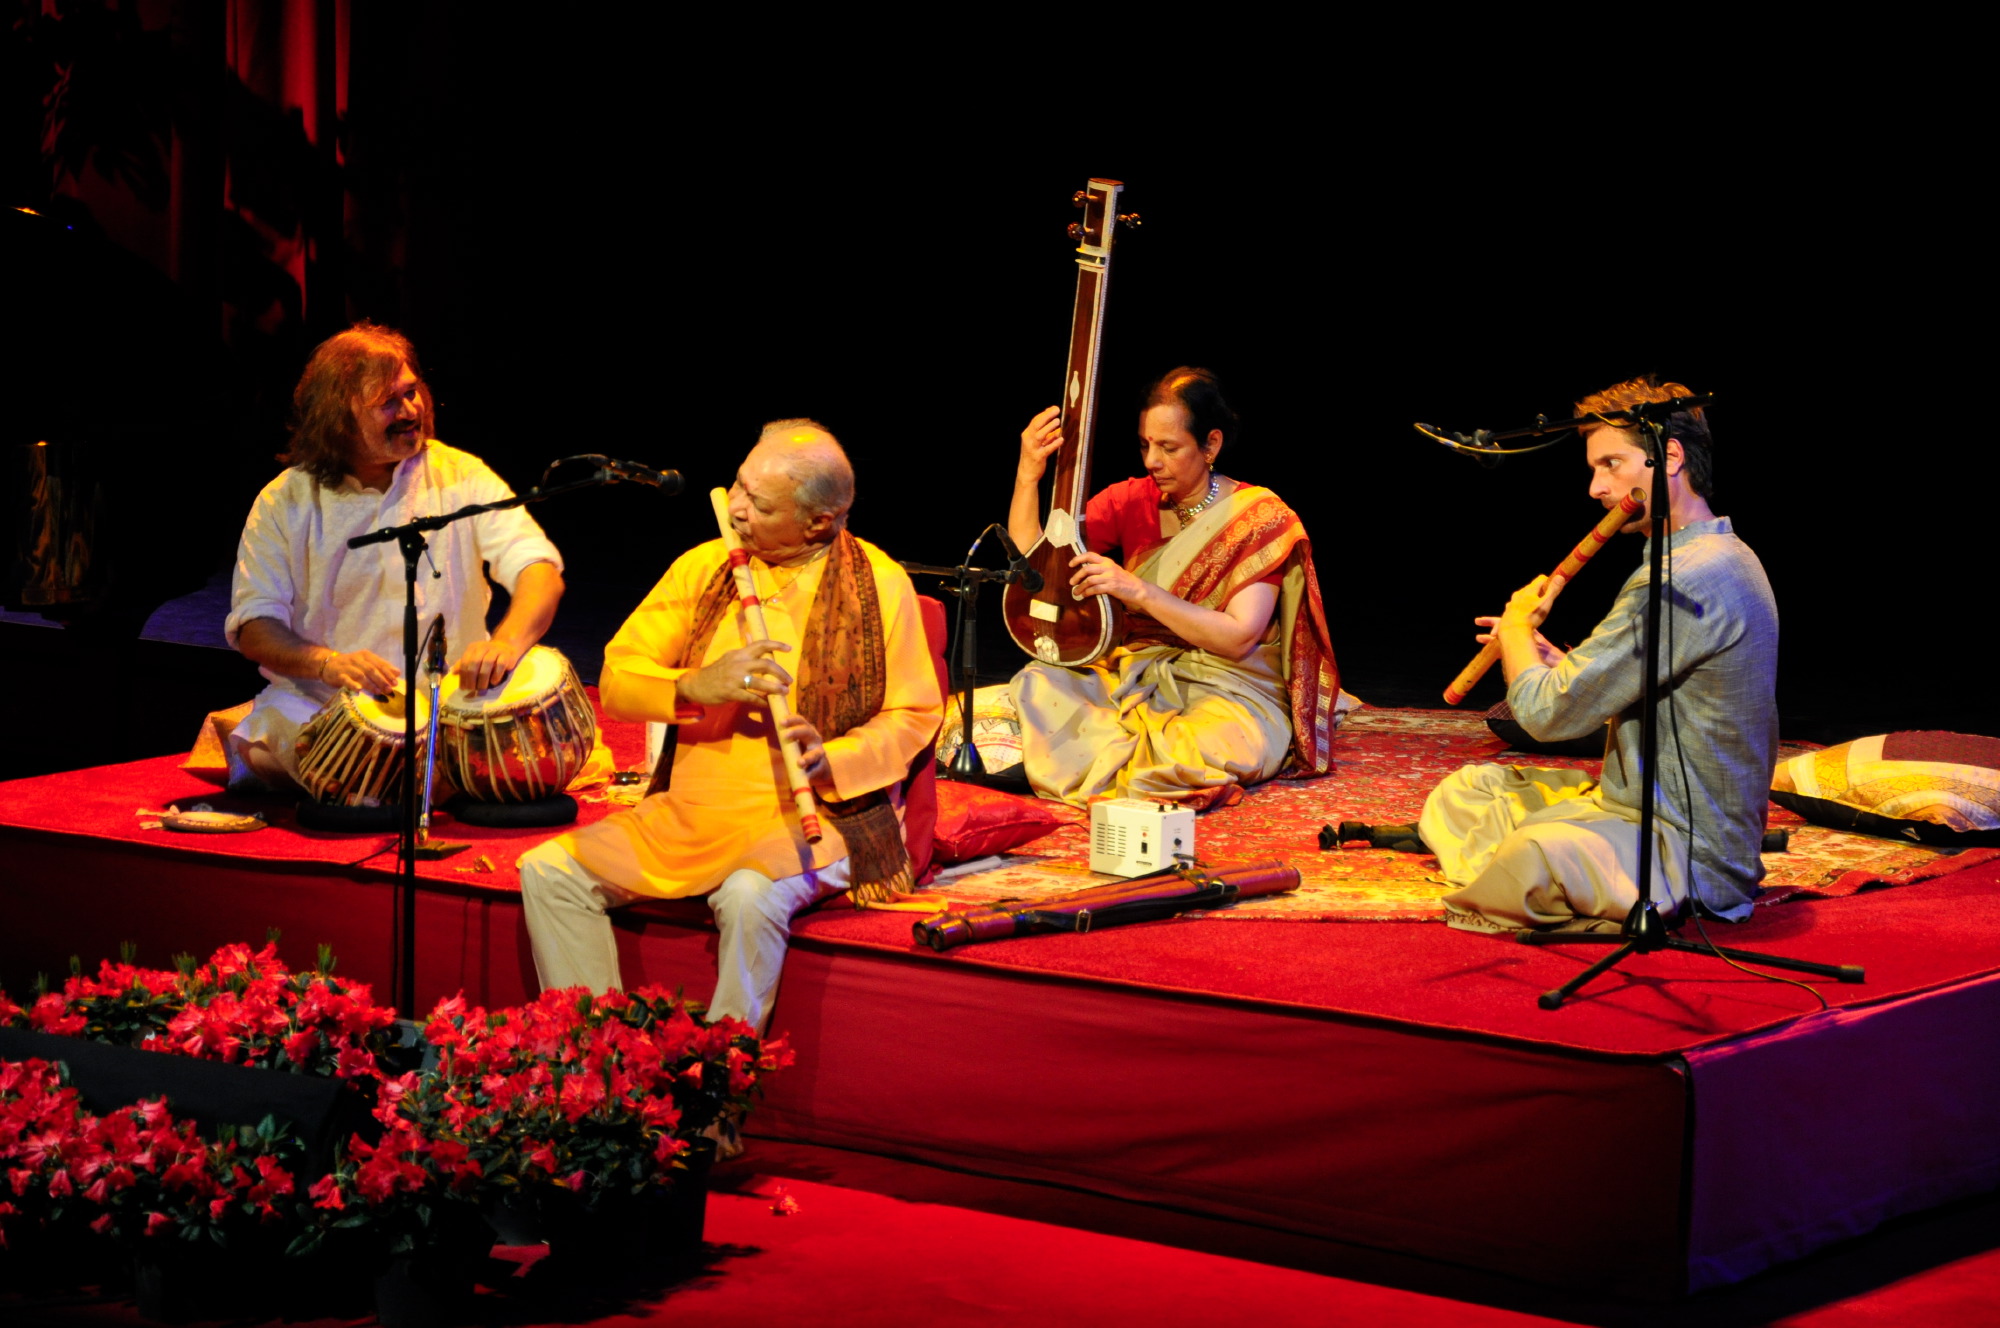 IMPACT OF GLOBALIZATION ON INDIAN CLASSICAL MUSIC